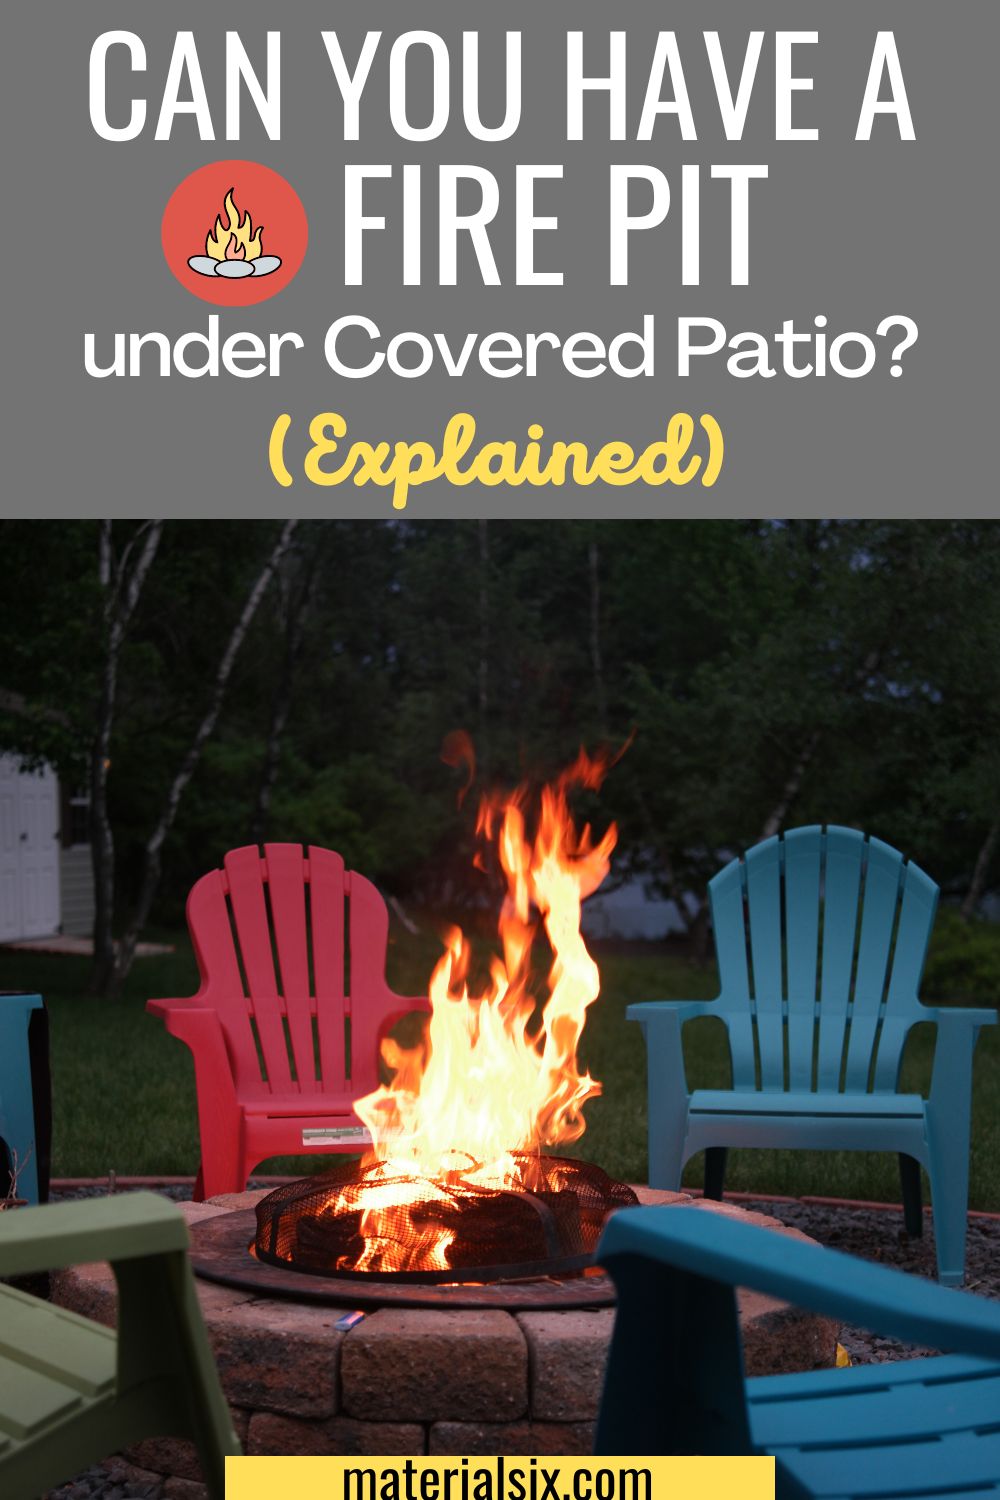 Can You Have a Fire Pit Under Covered Patio